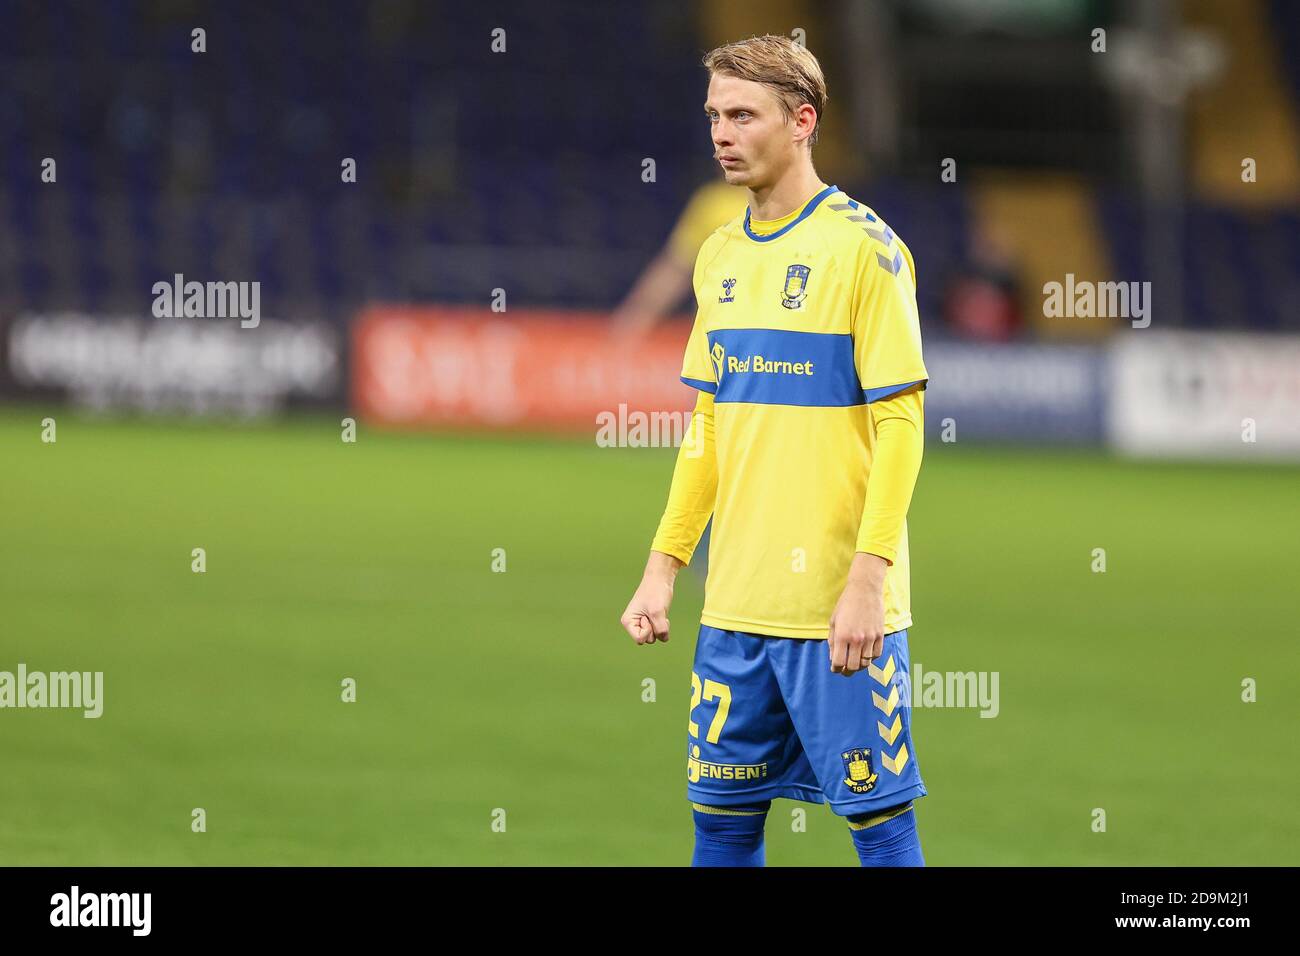 Broendby, Denmark. 5th Nov, 2020. Simon Hedlund (27) of Broendby IF seen  during the Sydbank Pokal match between Ledoeje-Smoerum Fodbold and Broendby  IF at Broendby Stadium in Broendby. (Proto Credit: Gonzales Photo/Alamy